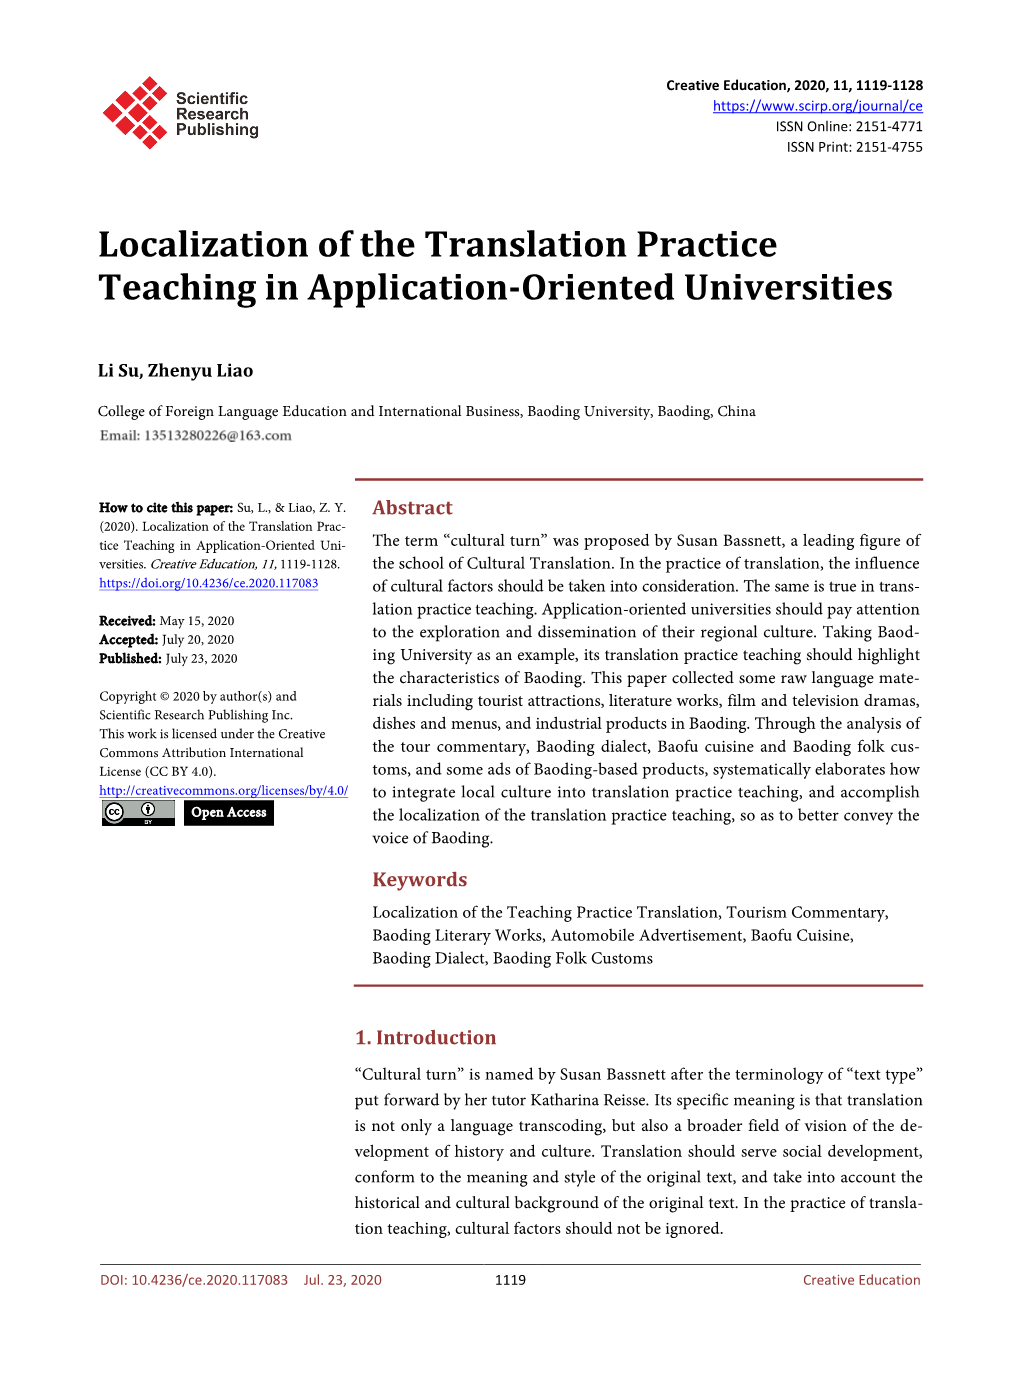 Localization of the Translation Practice Teaching in Application-Oriented Universities